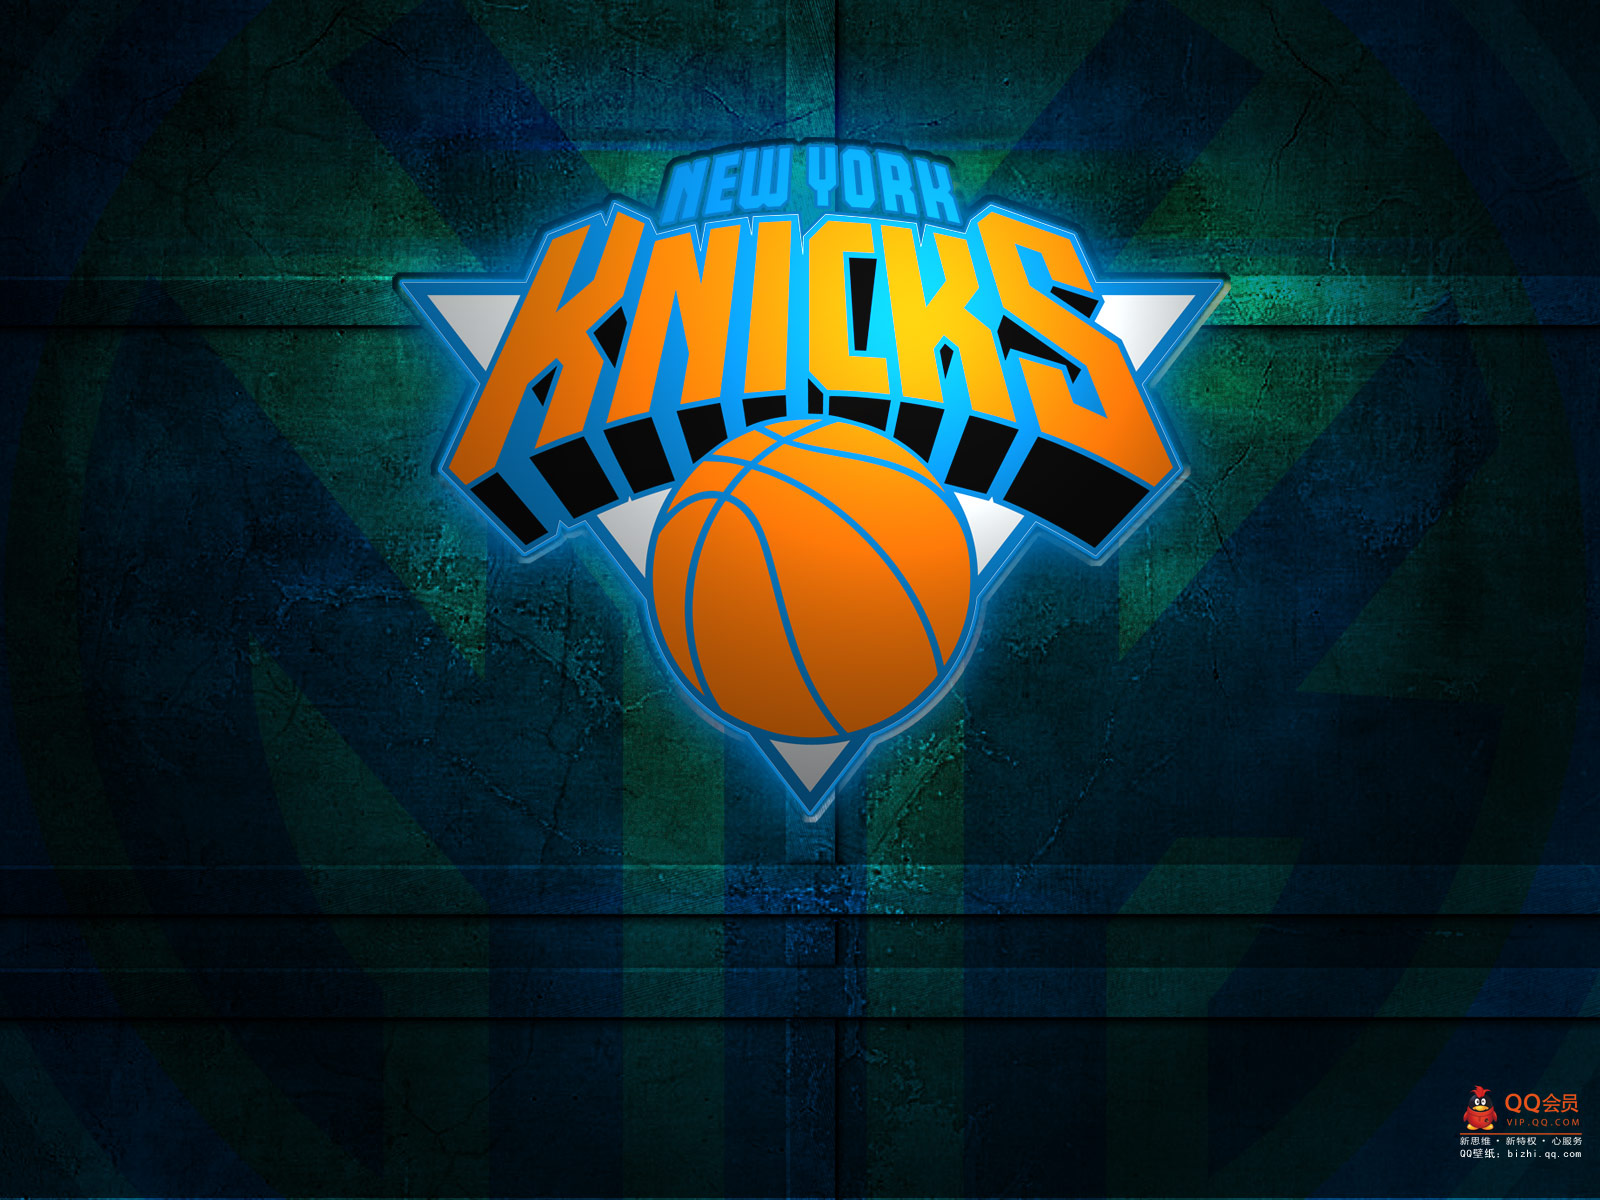 New York Knicks Wallpaper High Resolution And Quality